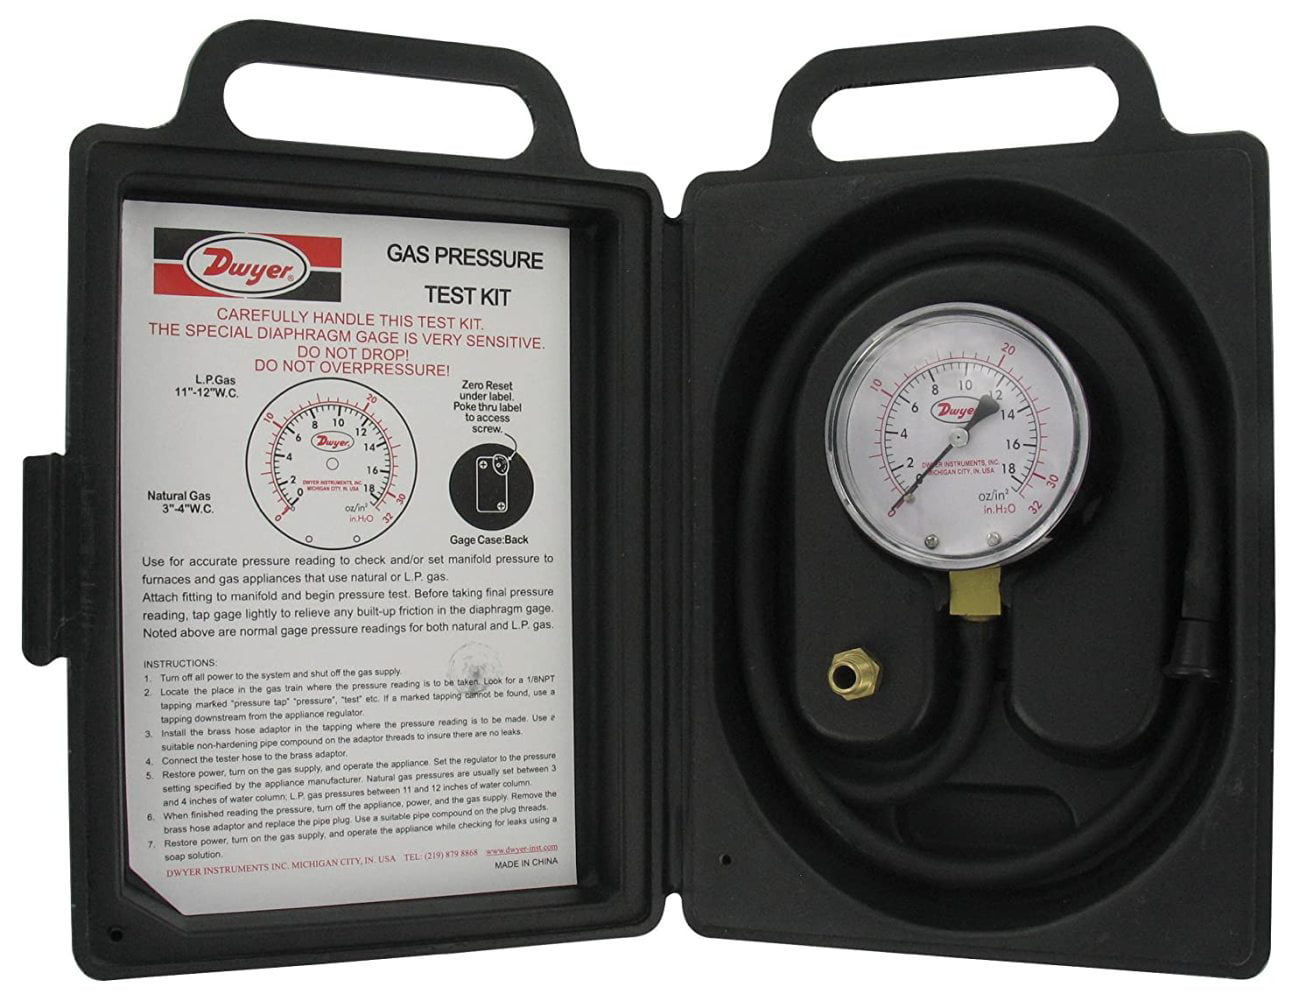 Uniweld Products 45503 Uni-weld Gas Pressure Test Kit for sale online 